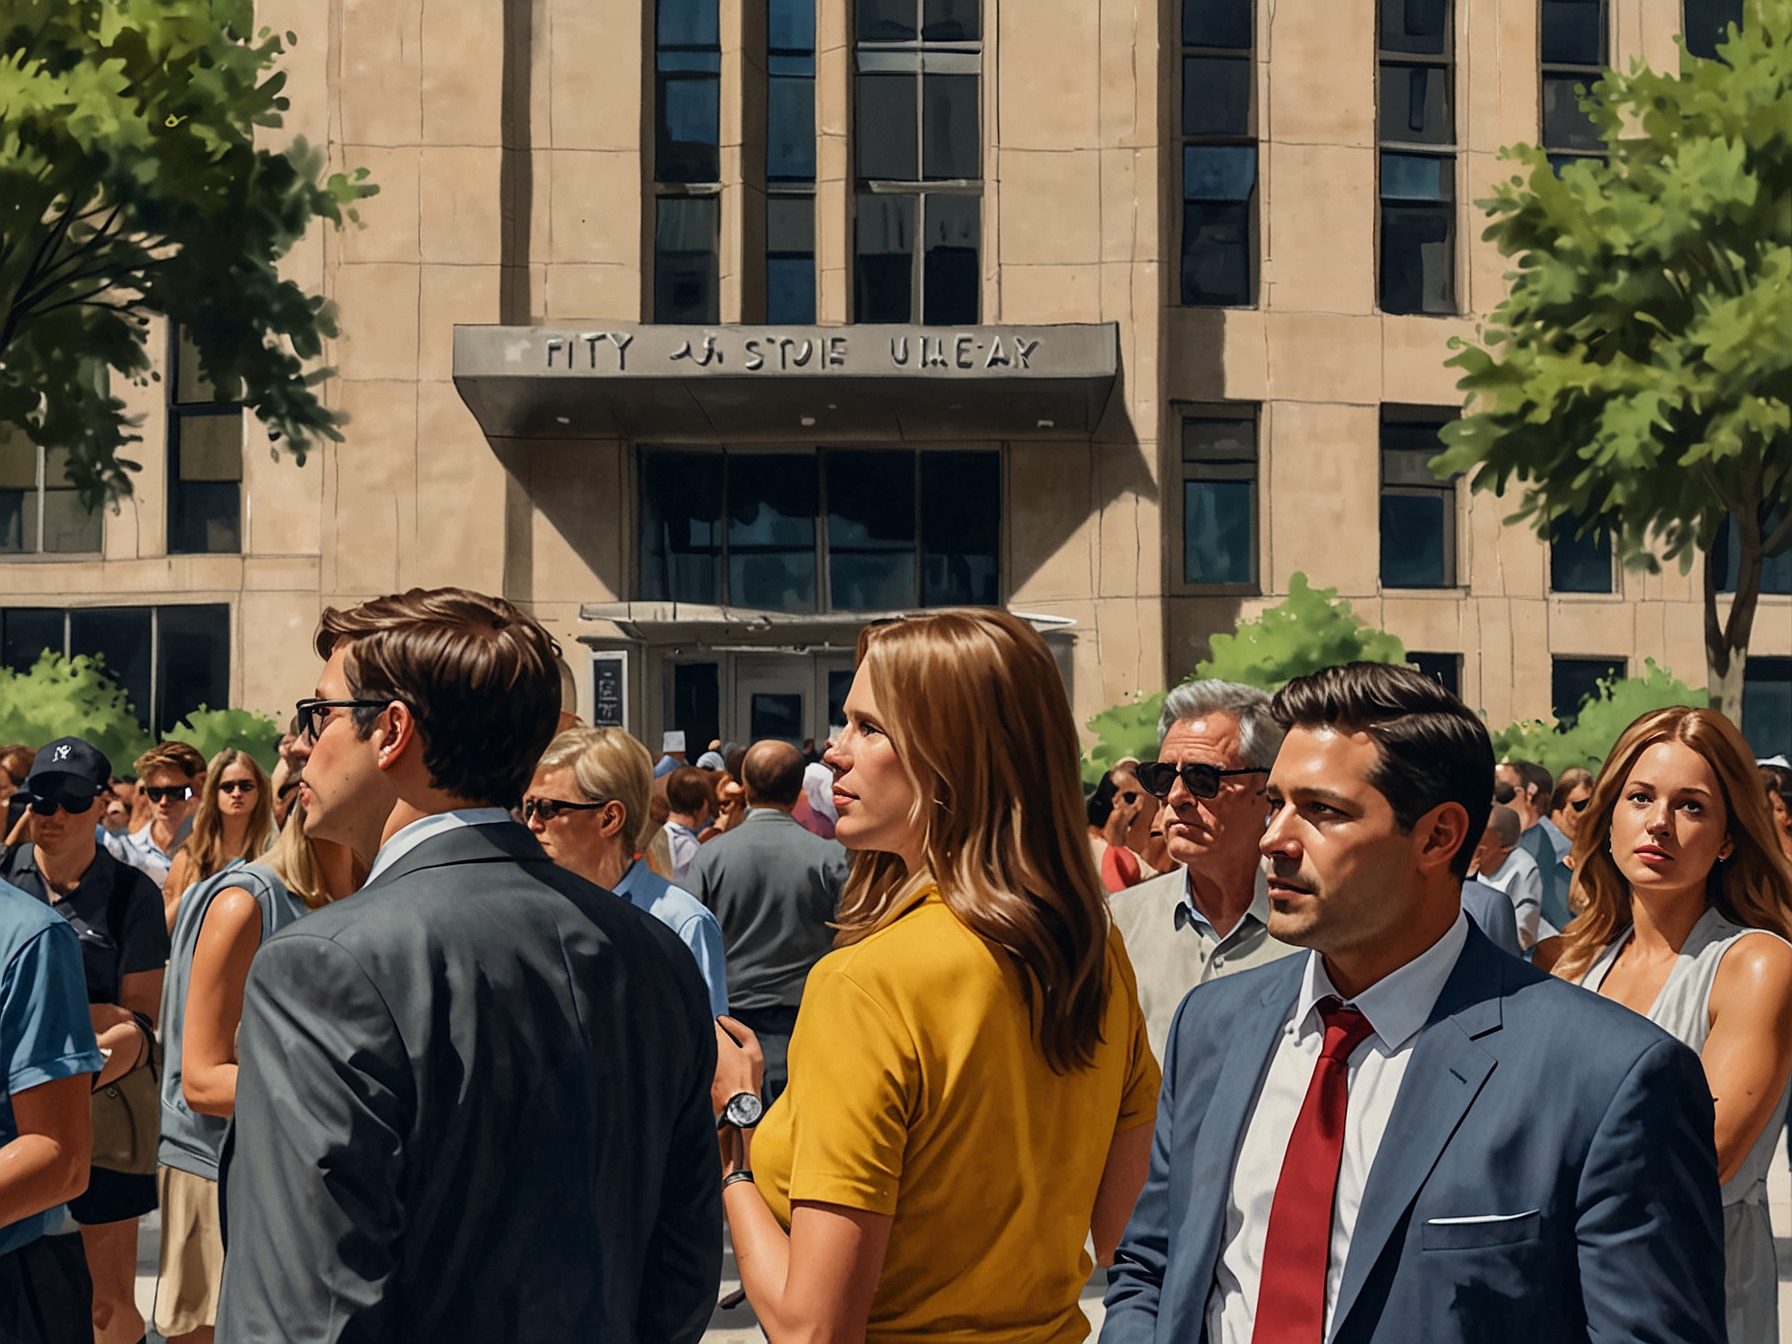 Fans of Fifty Fifty and media gathered outside the courthouse, capturing the intense public interest and speculation surrounding the high-profile lawsuit on August 29.